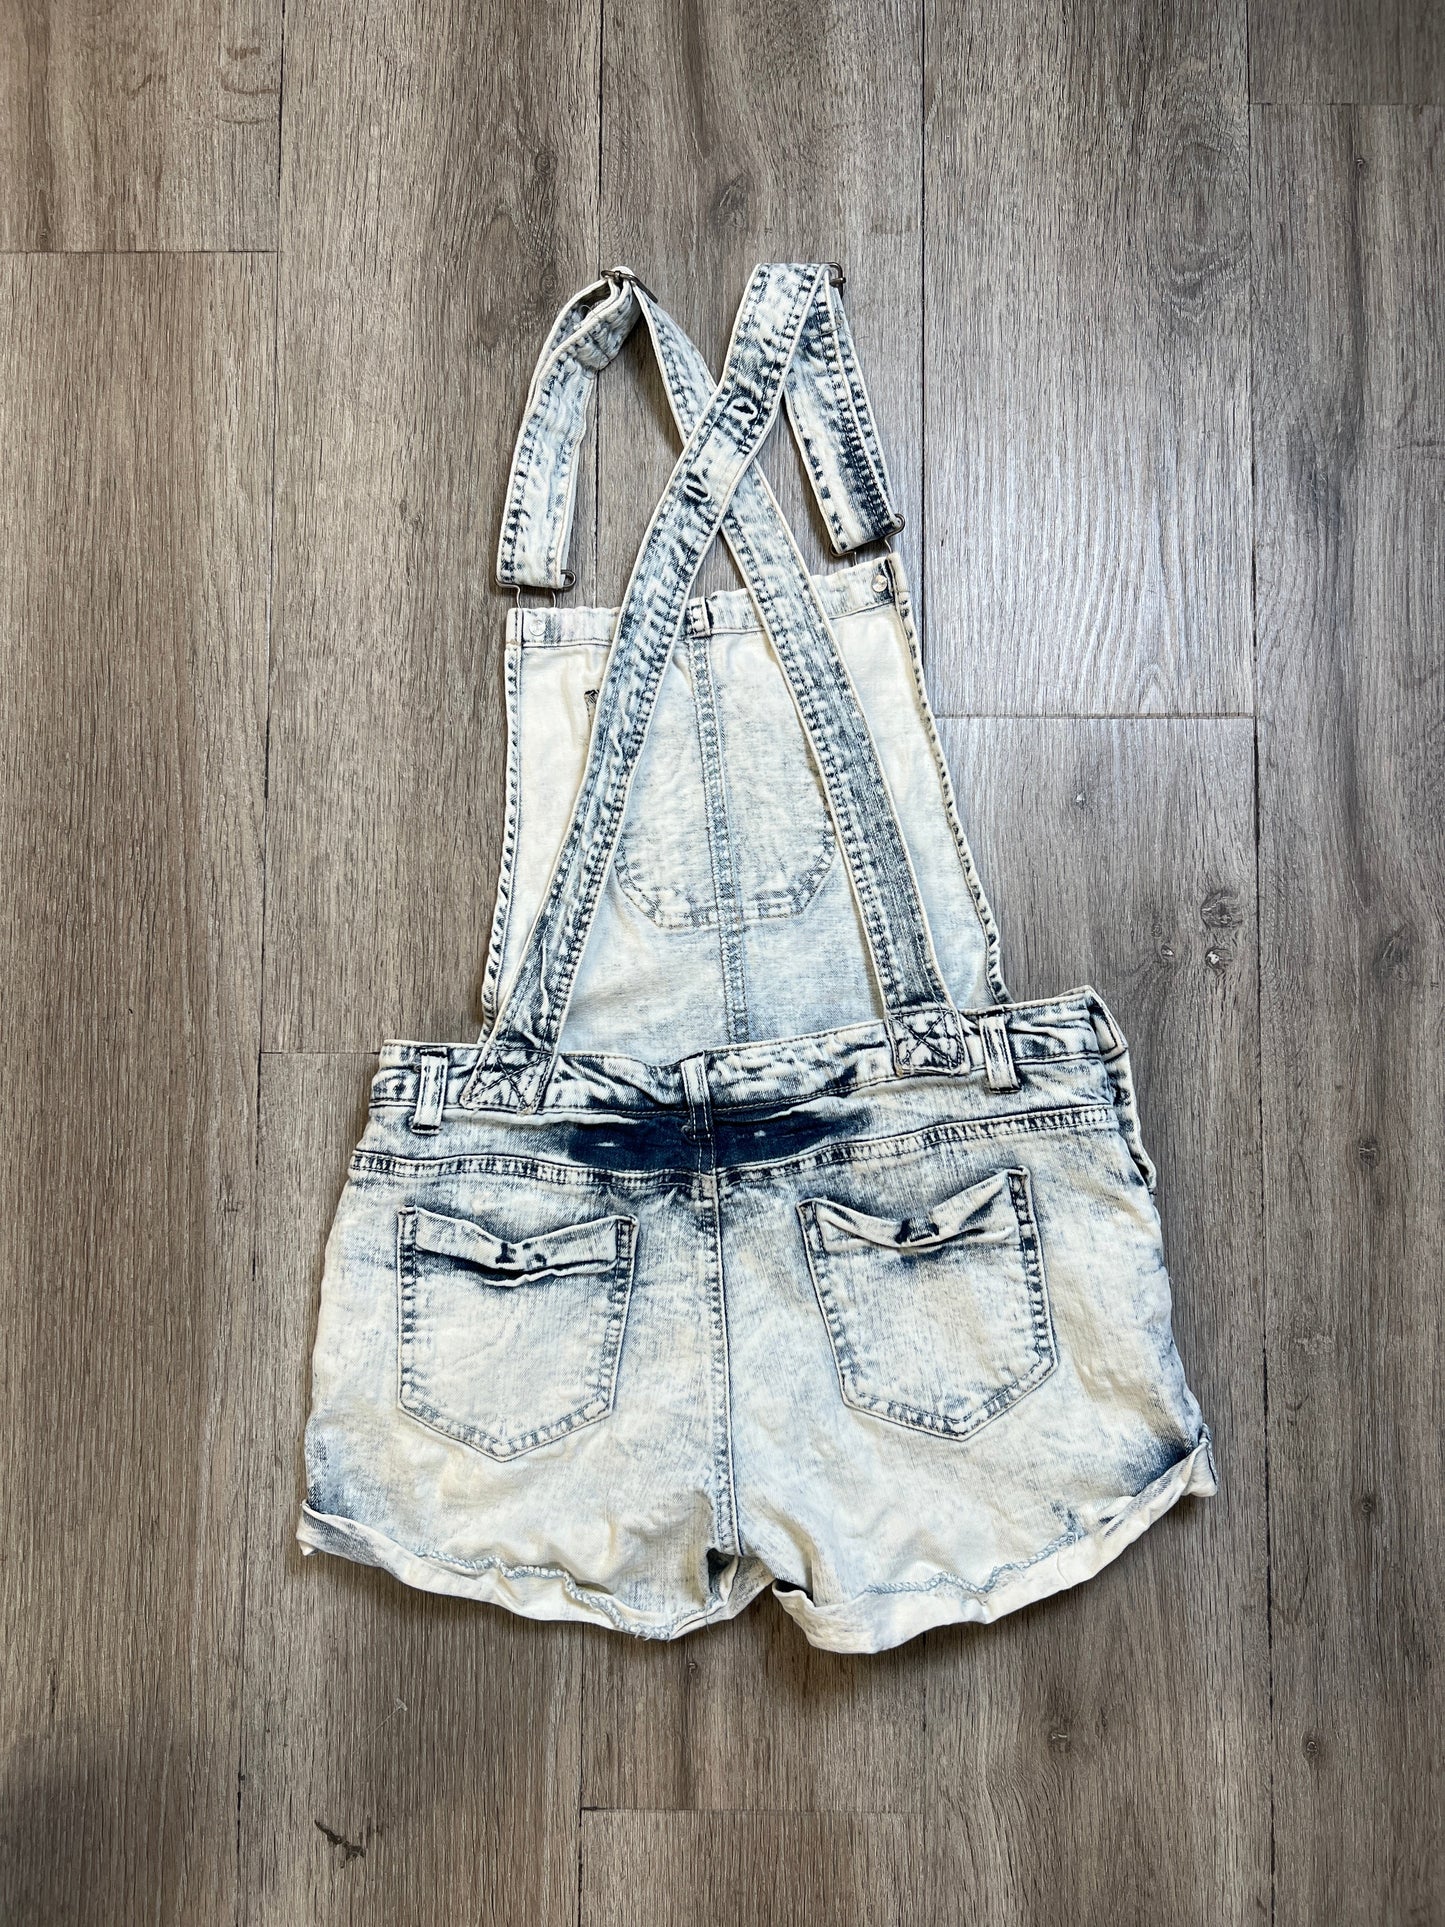 Overalls By Wallflower  Size: M